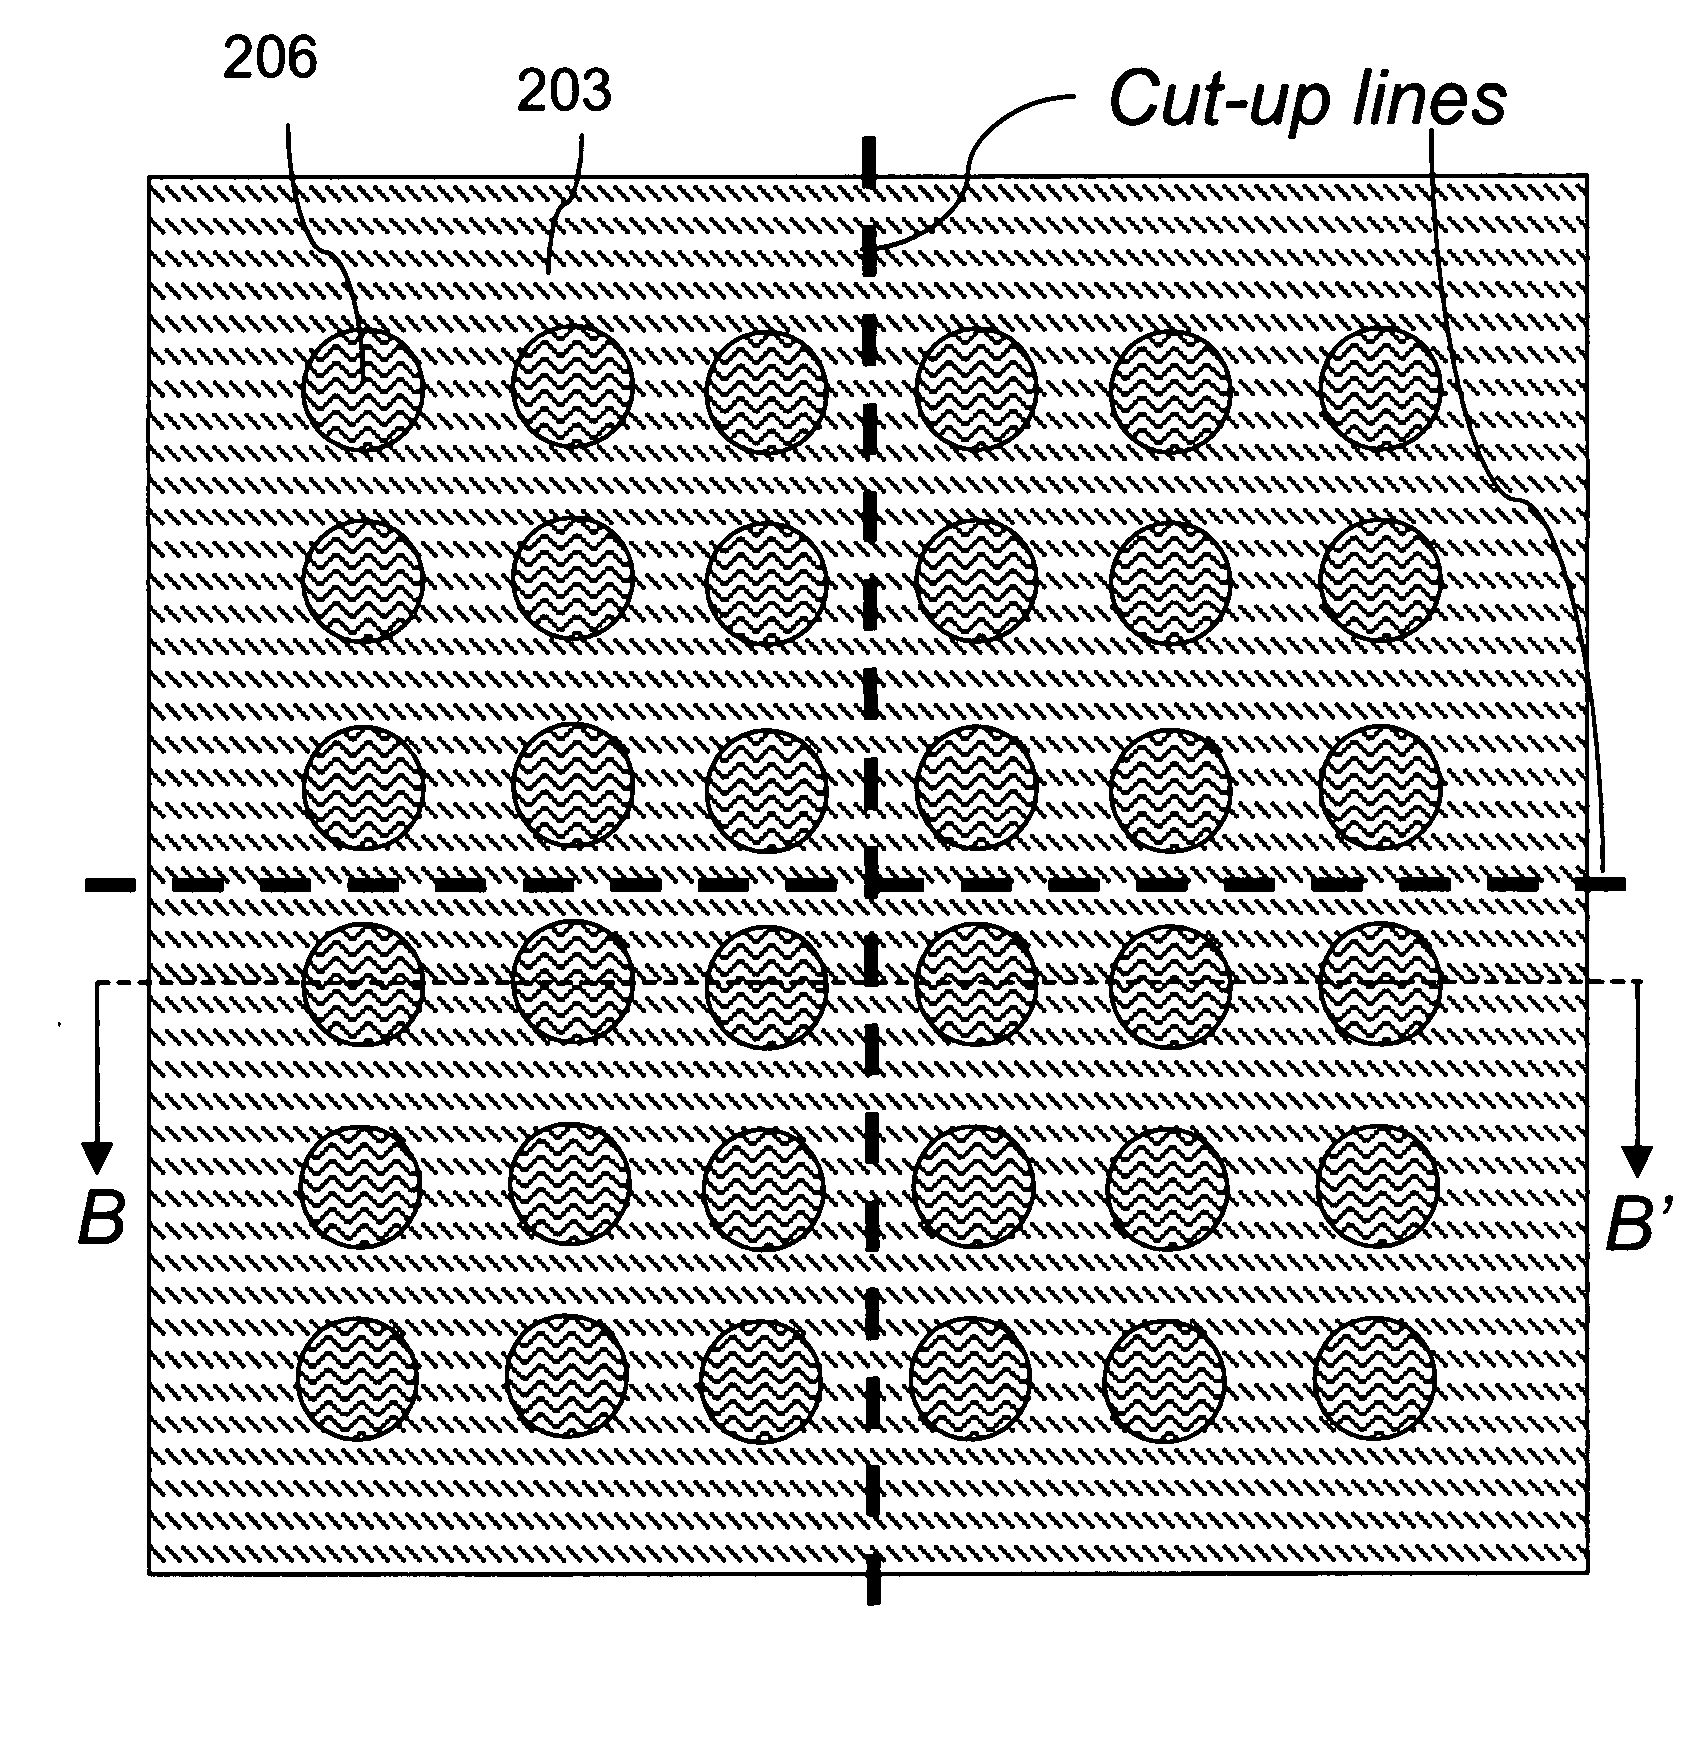 Interposer structures and methods of manufacturing the same